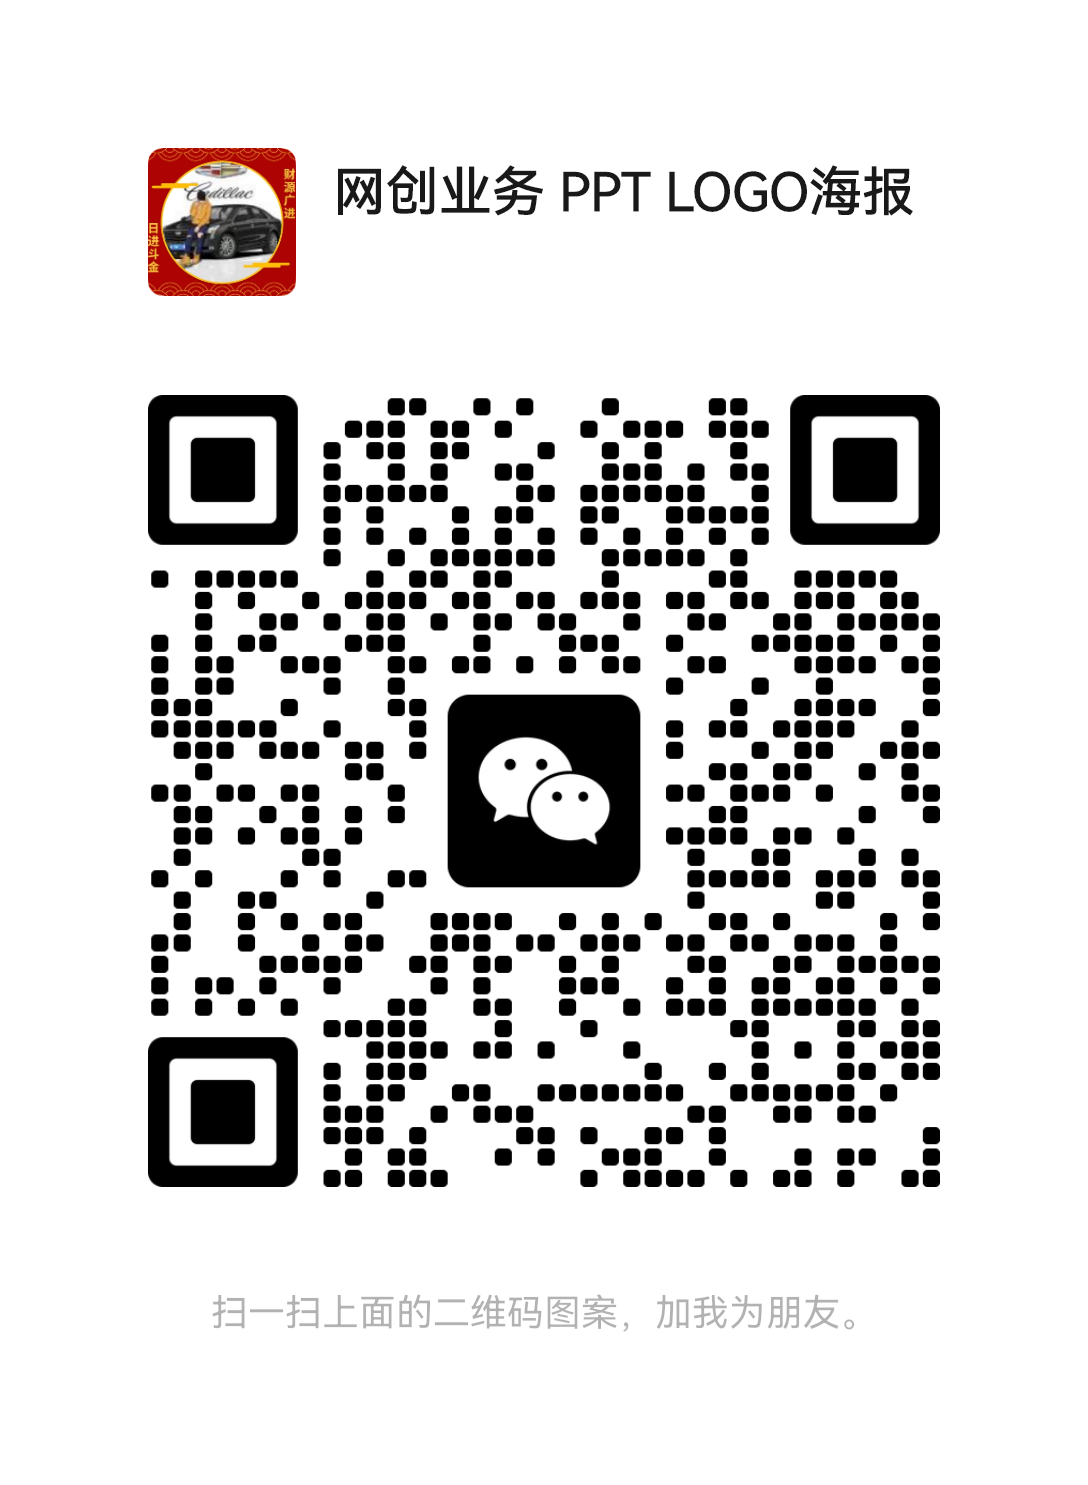 mmqrcode1695852001590.png